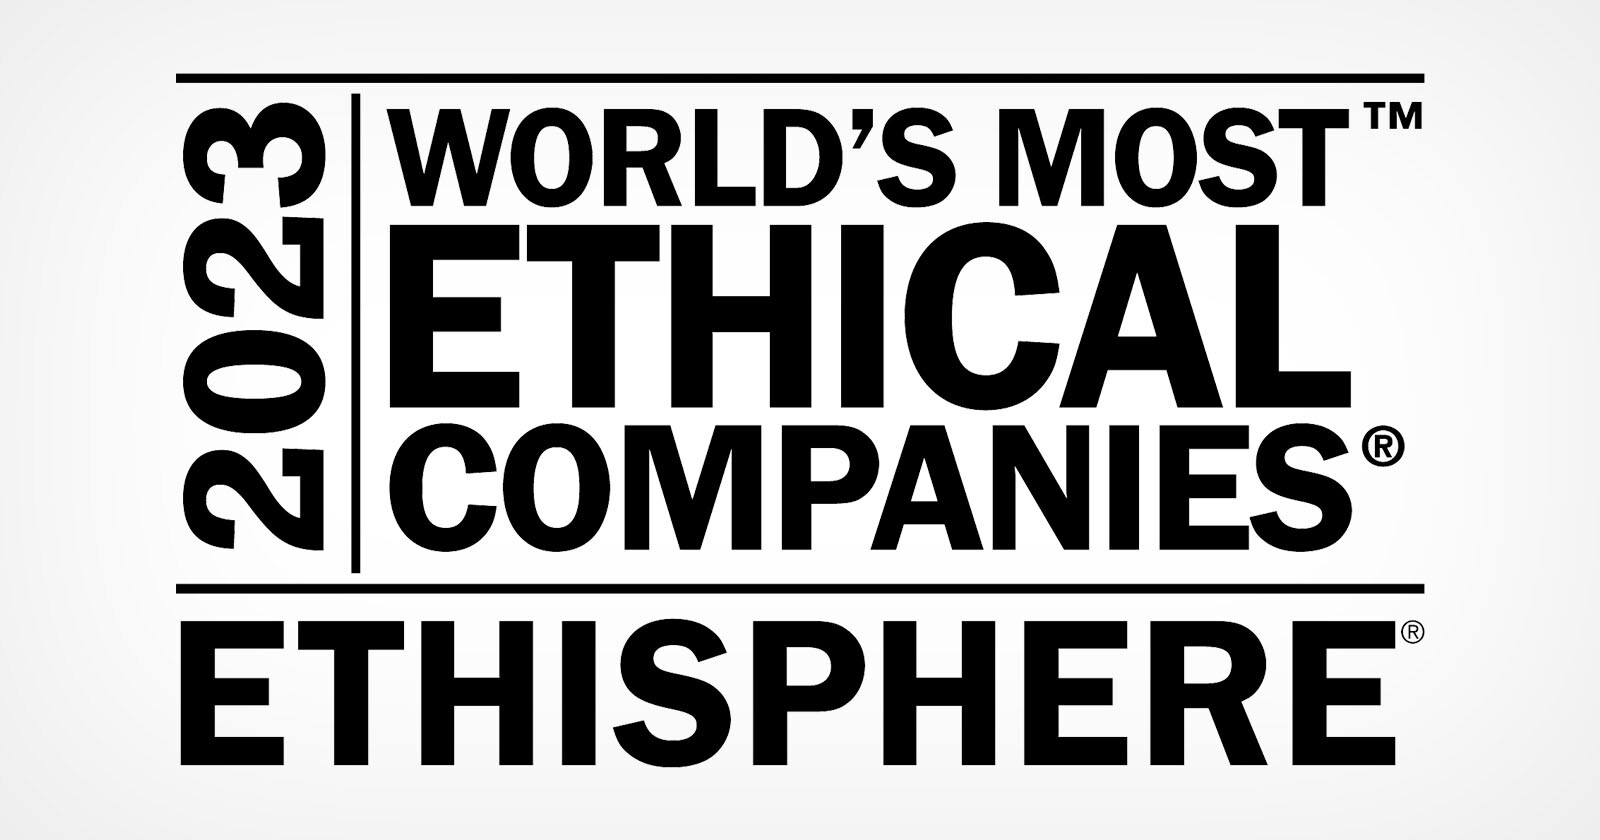 Sony Named One of Worlds Most Ethical Companies